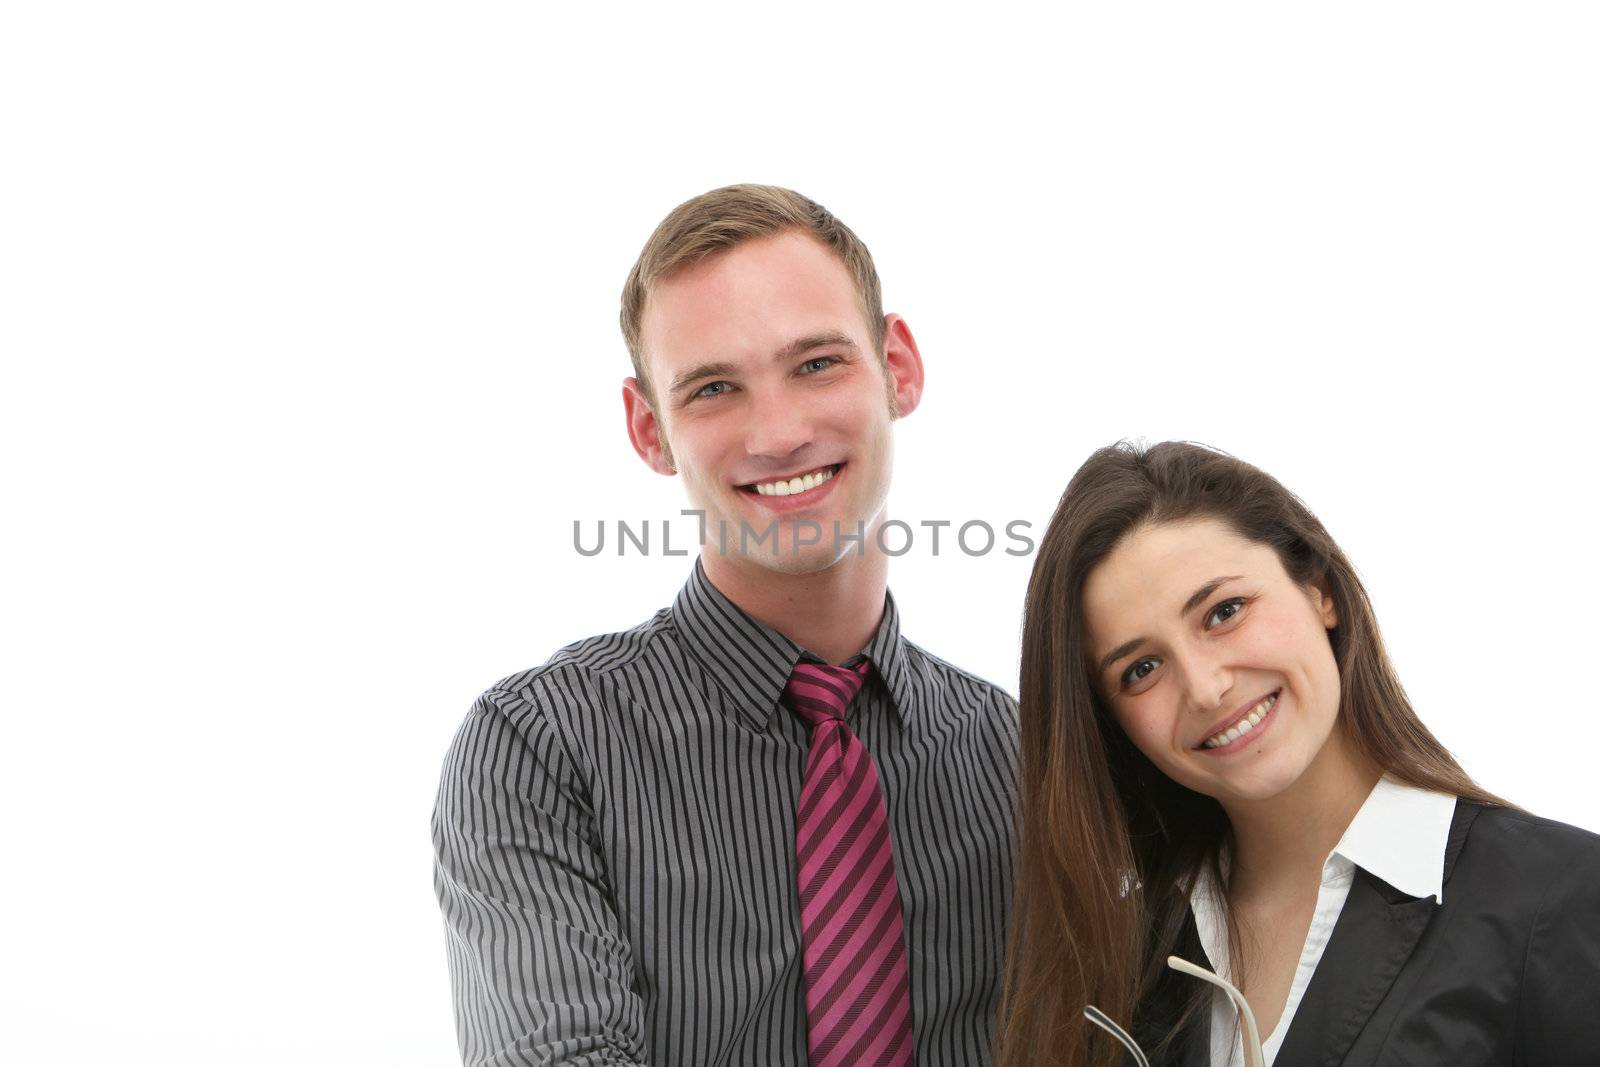 Attractive welcoming friendly young professional couple standing side by side smiling into the camera , isolated head and shoulders pose.